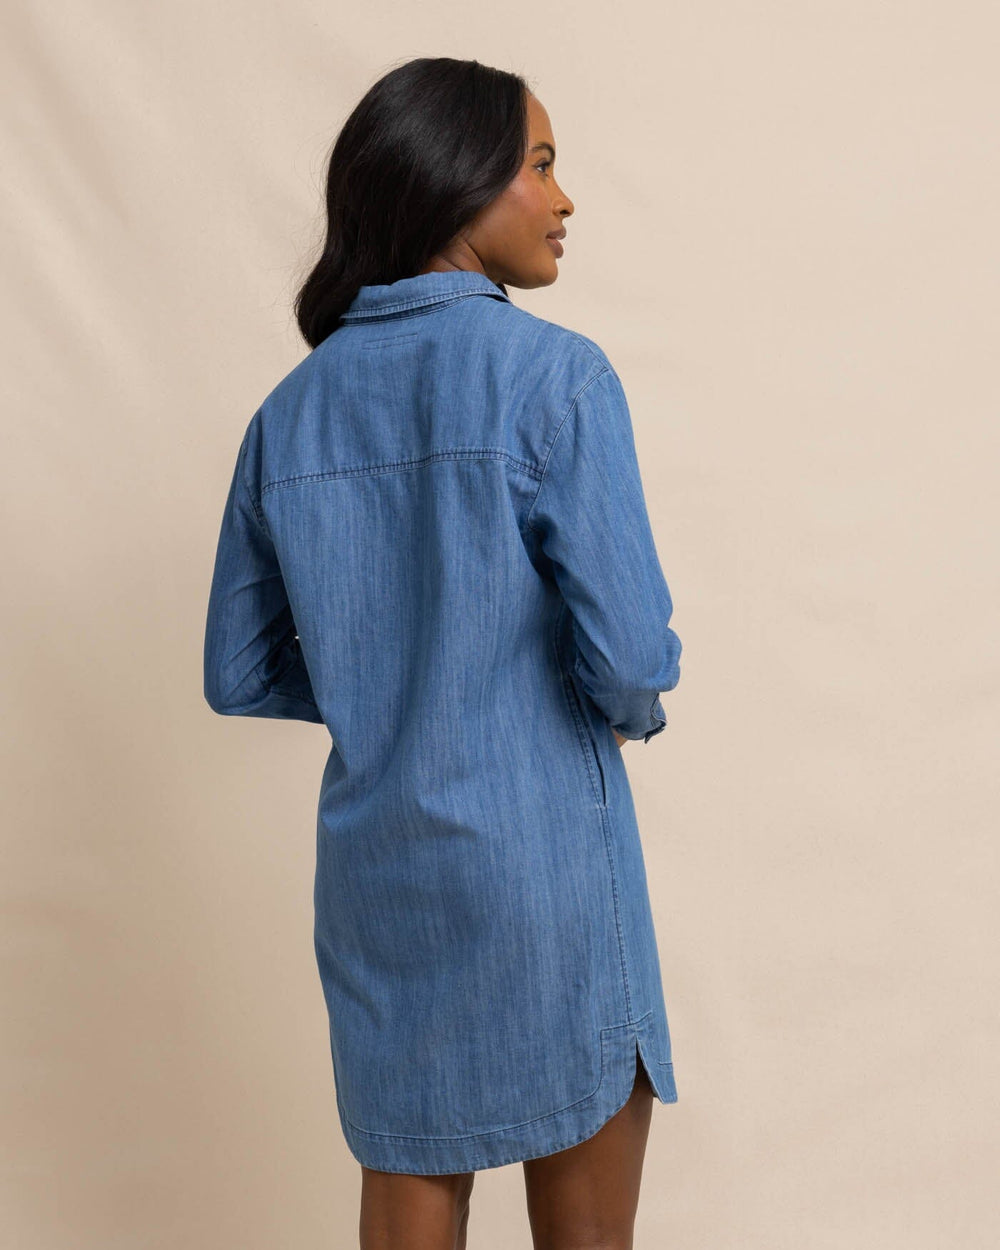 The back view of the Southern Tide Cam Denim Dress by Southern Tide - Medium Wash Indigo